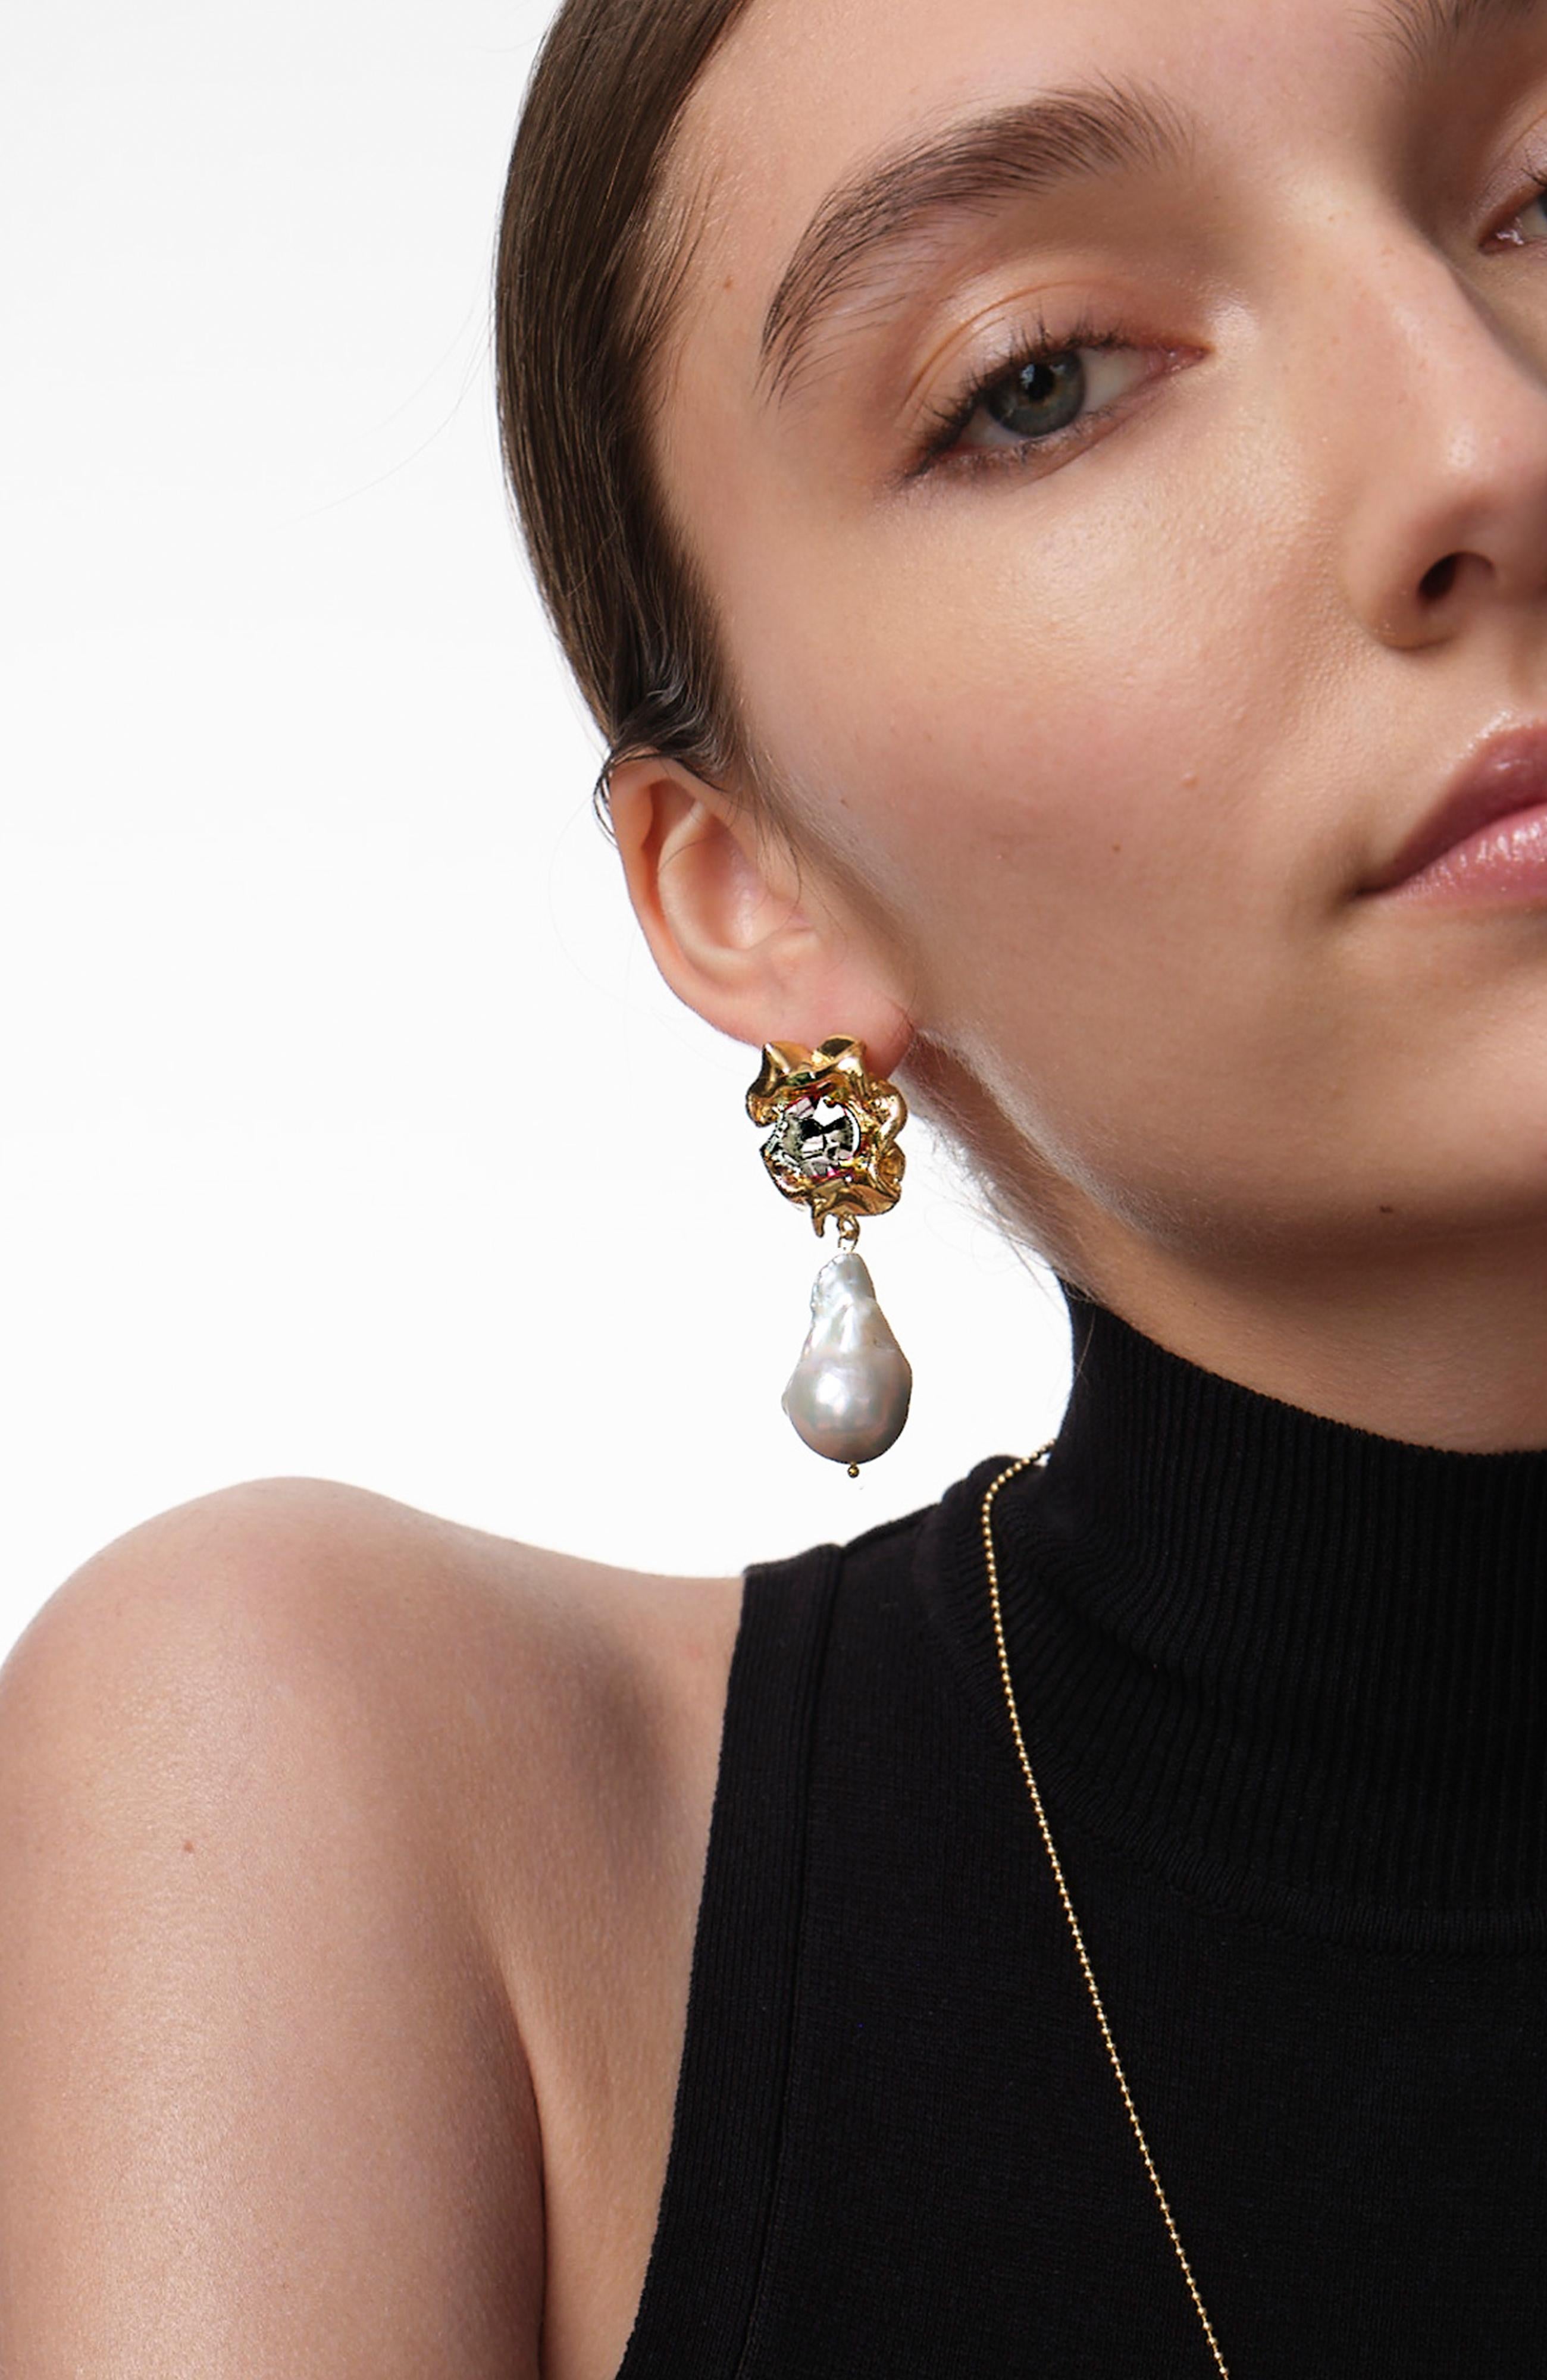 The Lola Pearl Drop Earrings feature baroques pearls suspended from rose cut crystals in a ruffled gold setting. The clear crystals, white pearls, and gold settings make them easy to style with any look. 

These earrings are both classic and modern–